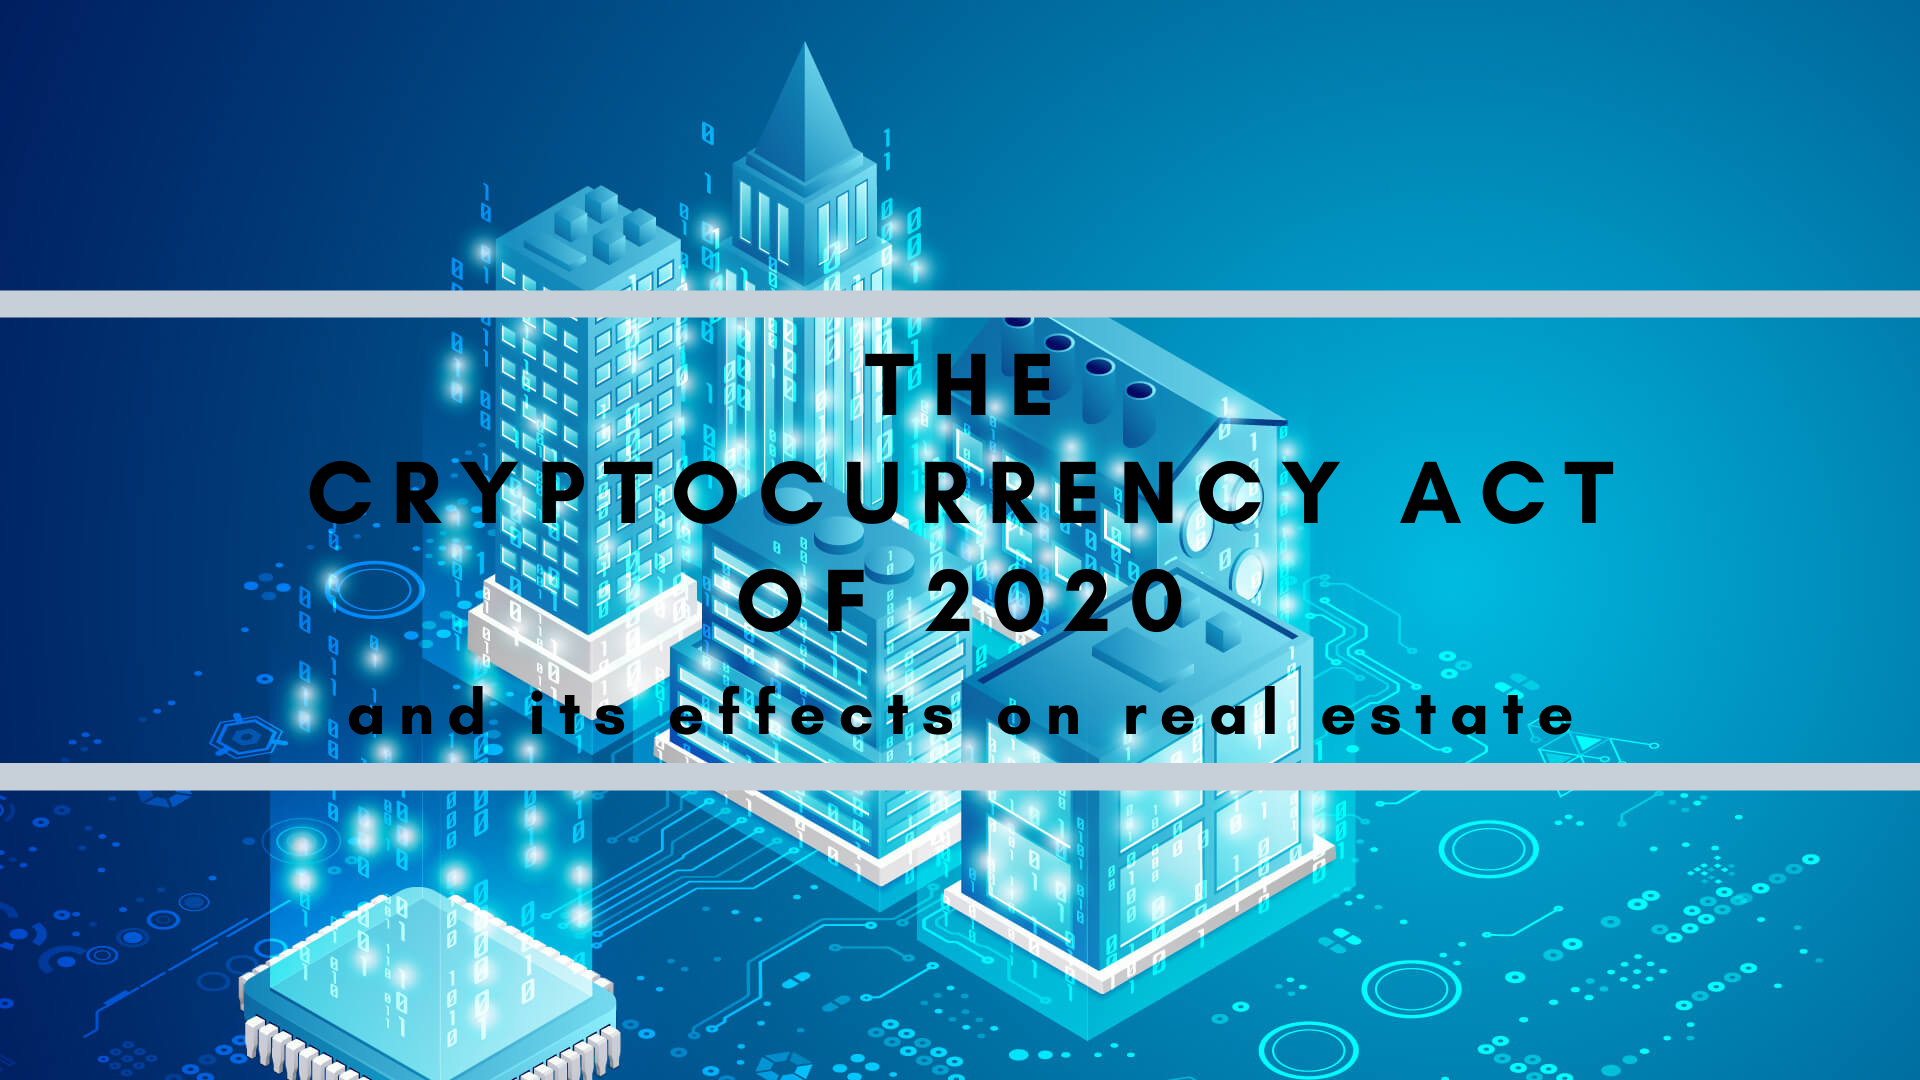 the cryptocurrency act of 2020 and its effects on real estate